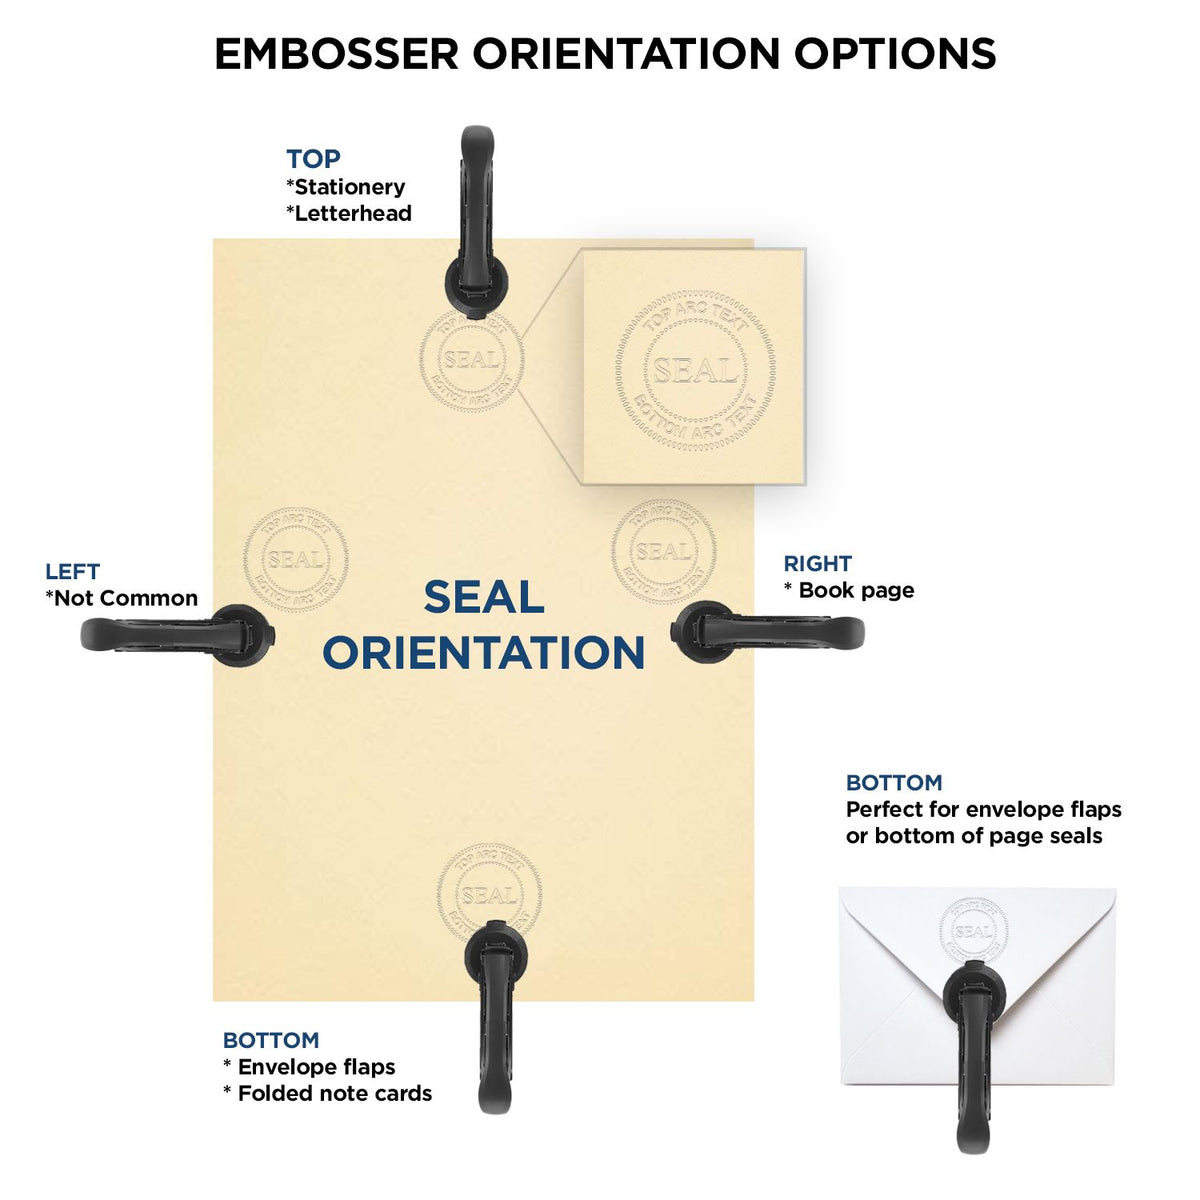 An infographic for the State of North Carolina Extended Long Reach Engineer Seal showing embosser orientation, this is showing examples of a top, bottom, right and left insert.